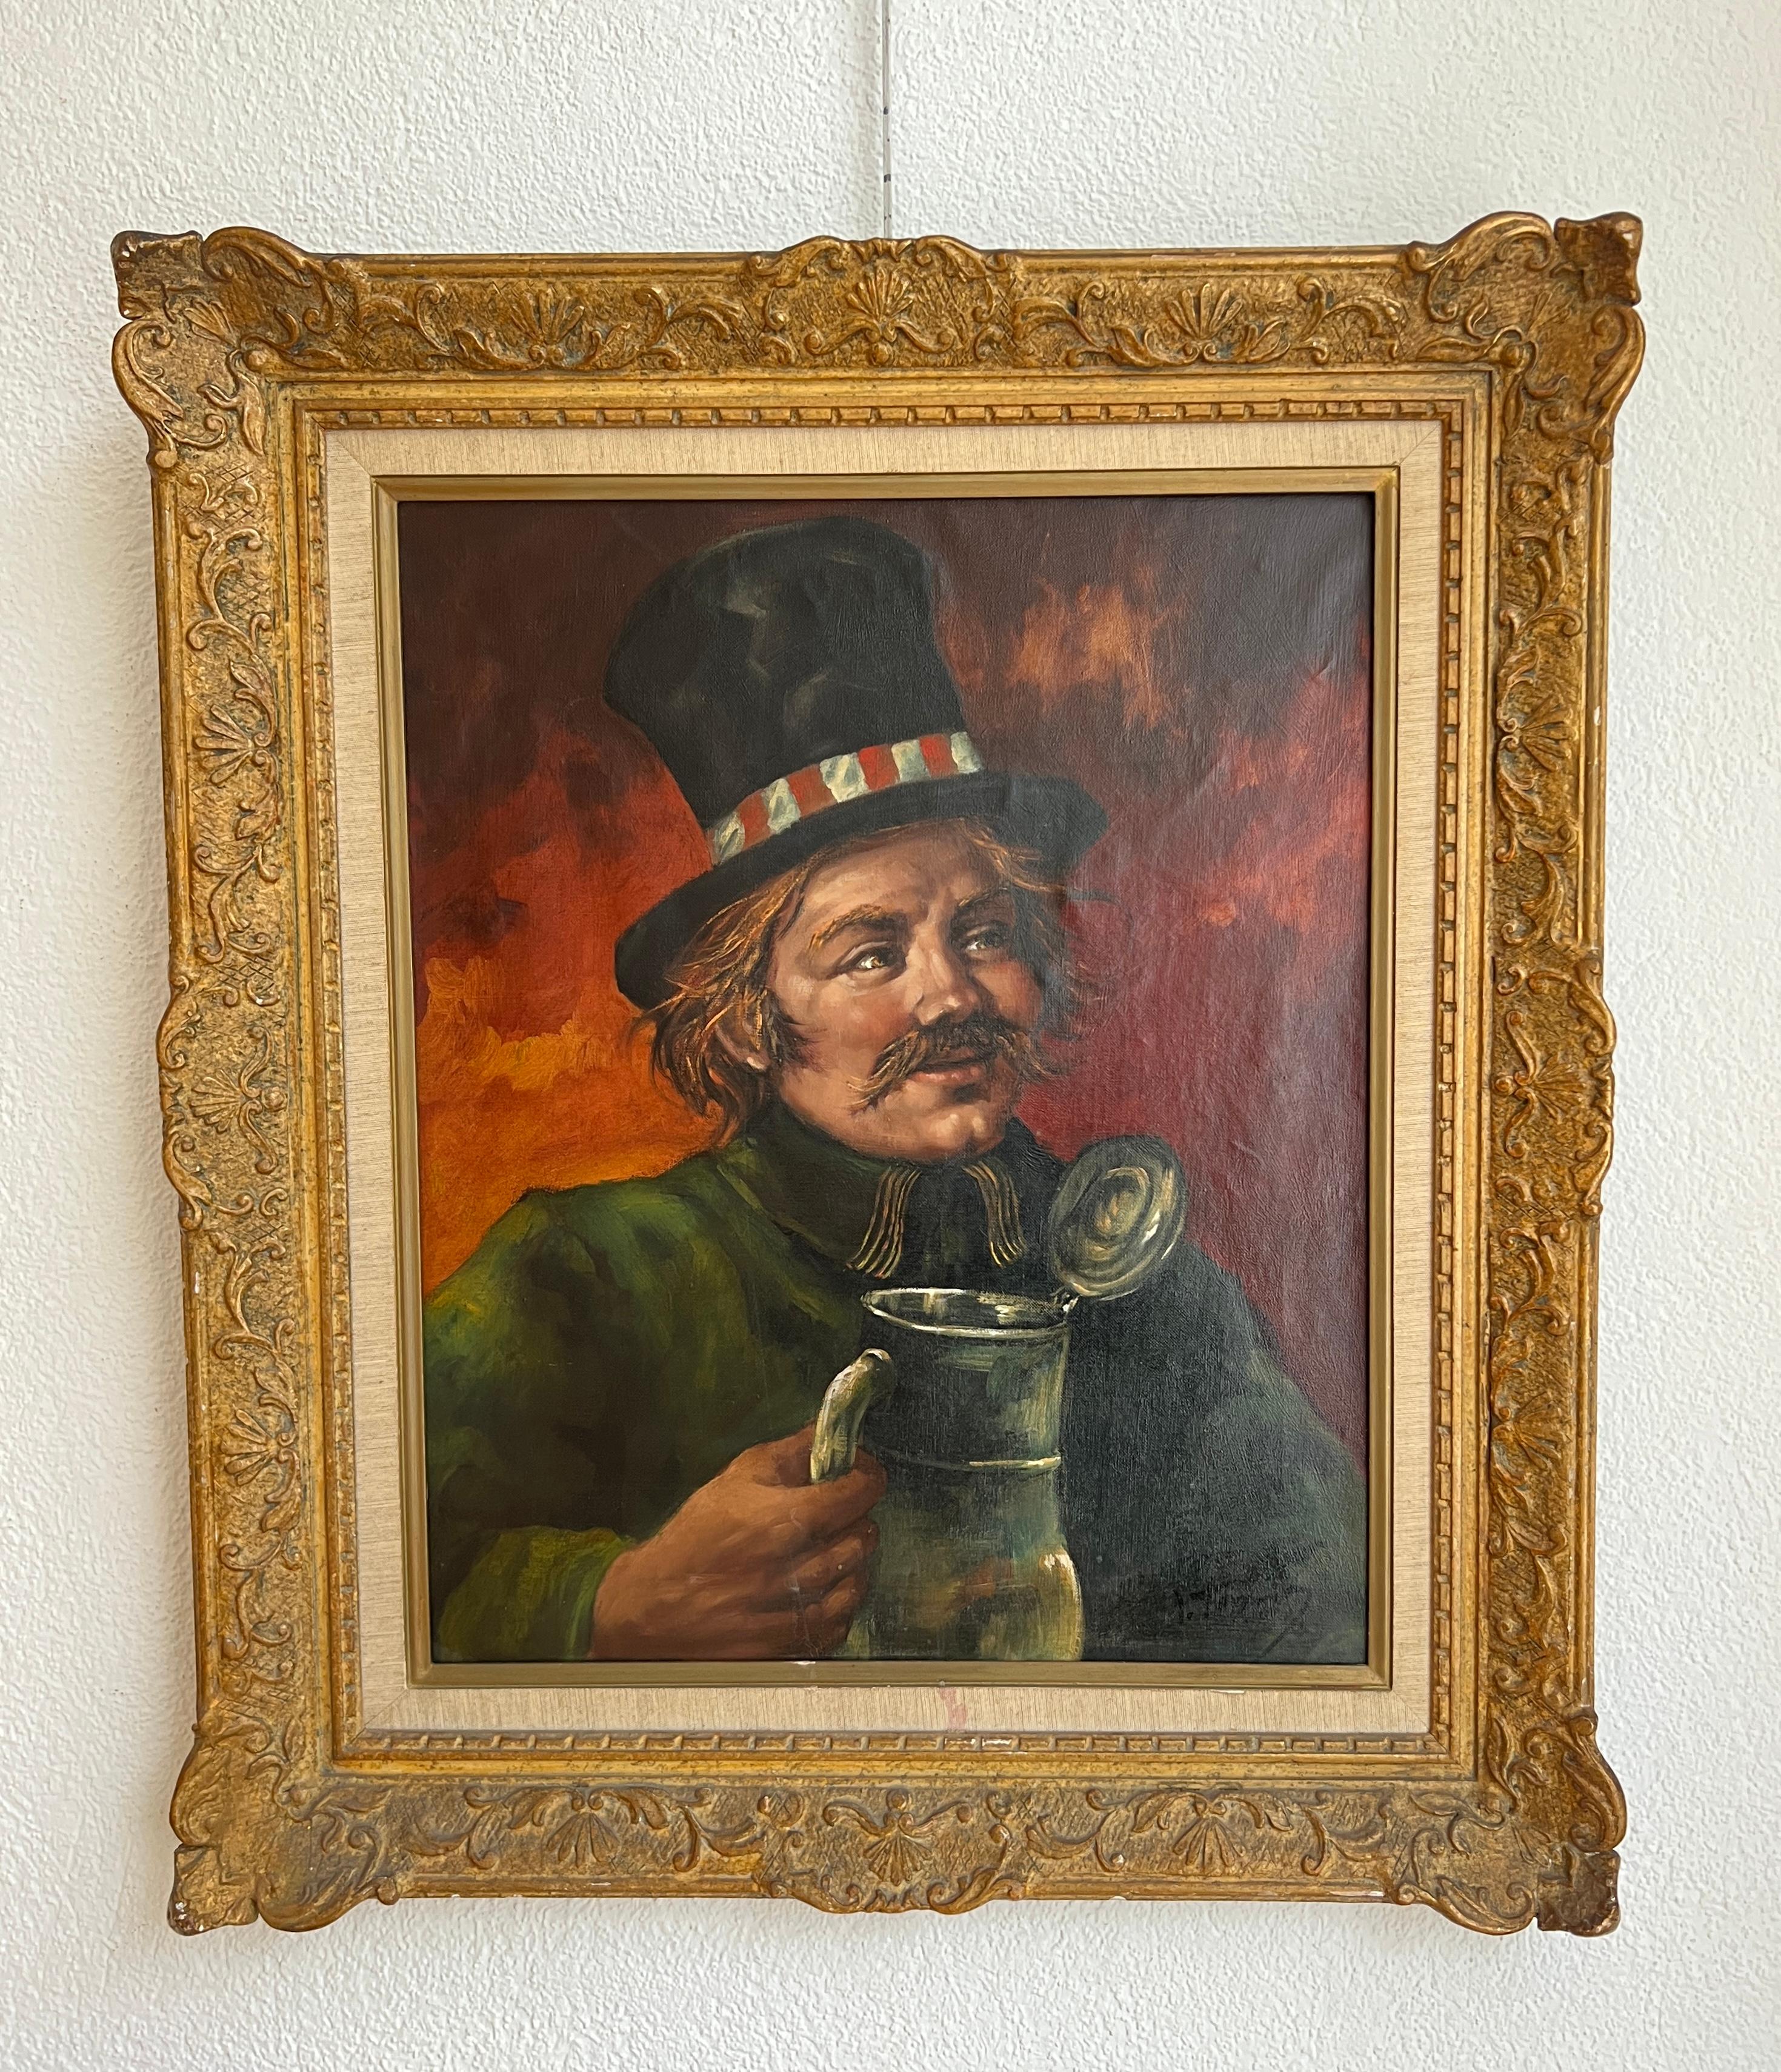 The man and the mug - Painting by I Tomig